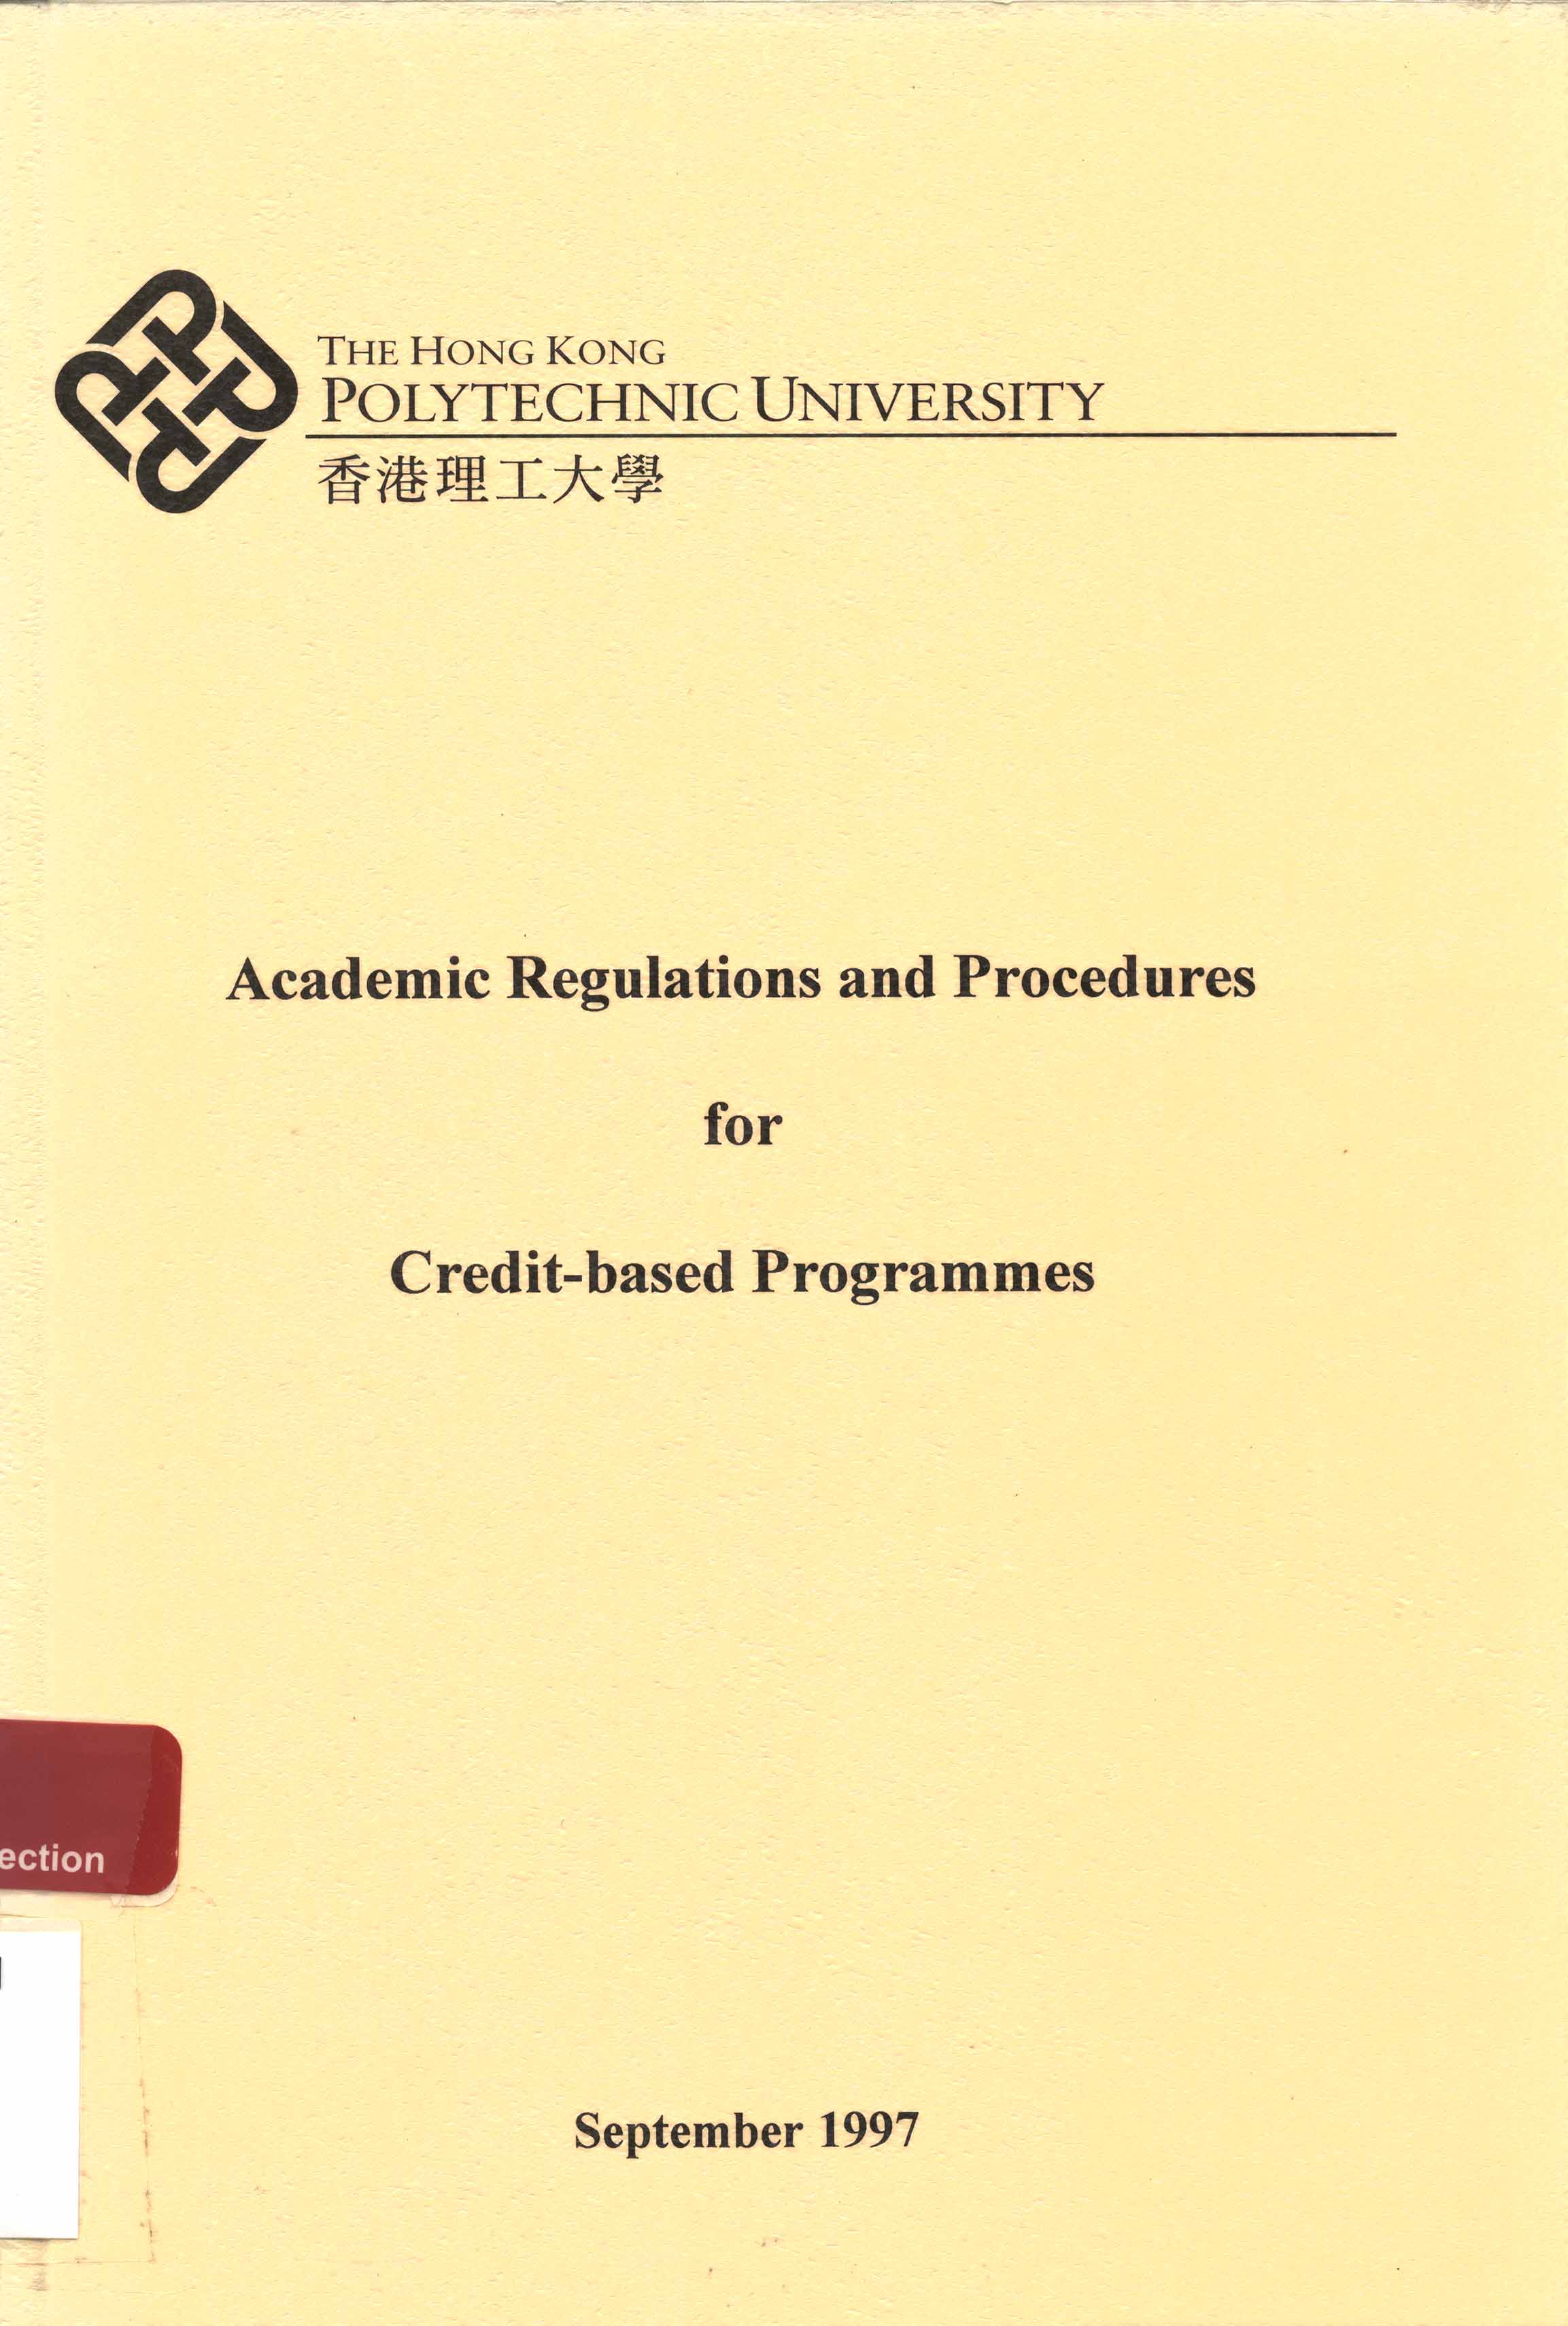 Academic regulations and procedures for credit-based programmes